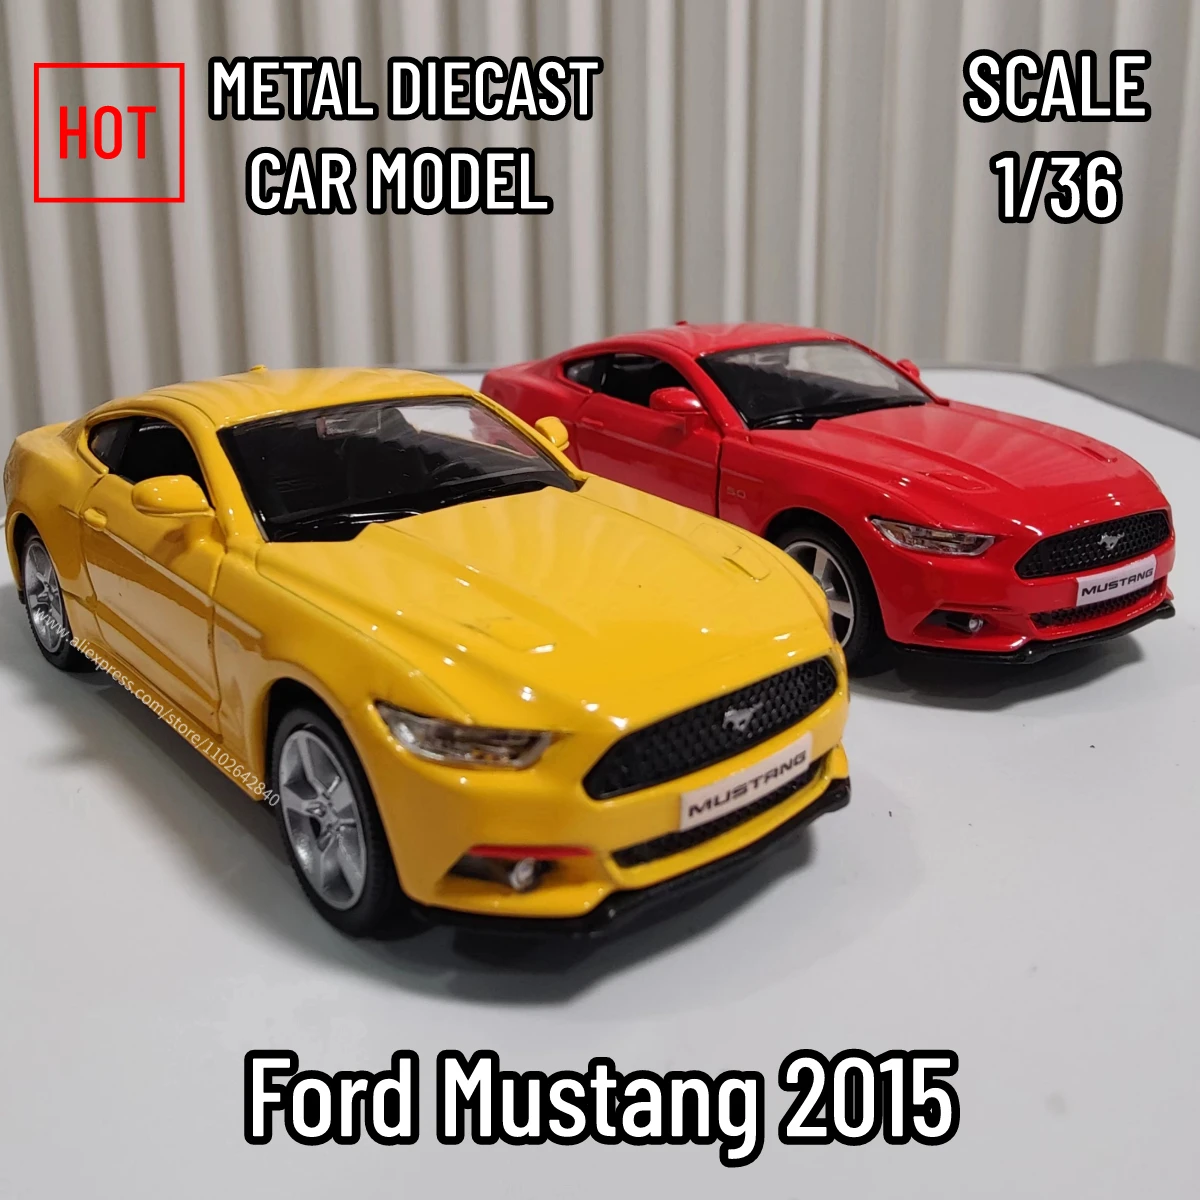 1:36 Scale Ford Mustang 2015 Car Model Replica Diecast Vehicle Miniature Home Office Interior Decor Xmas Gift Kid Boy Toy